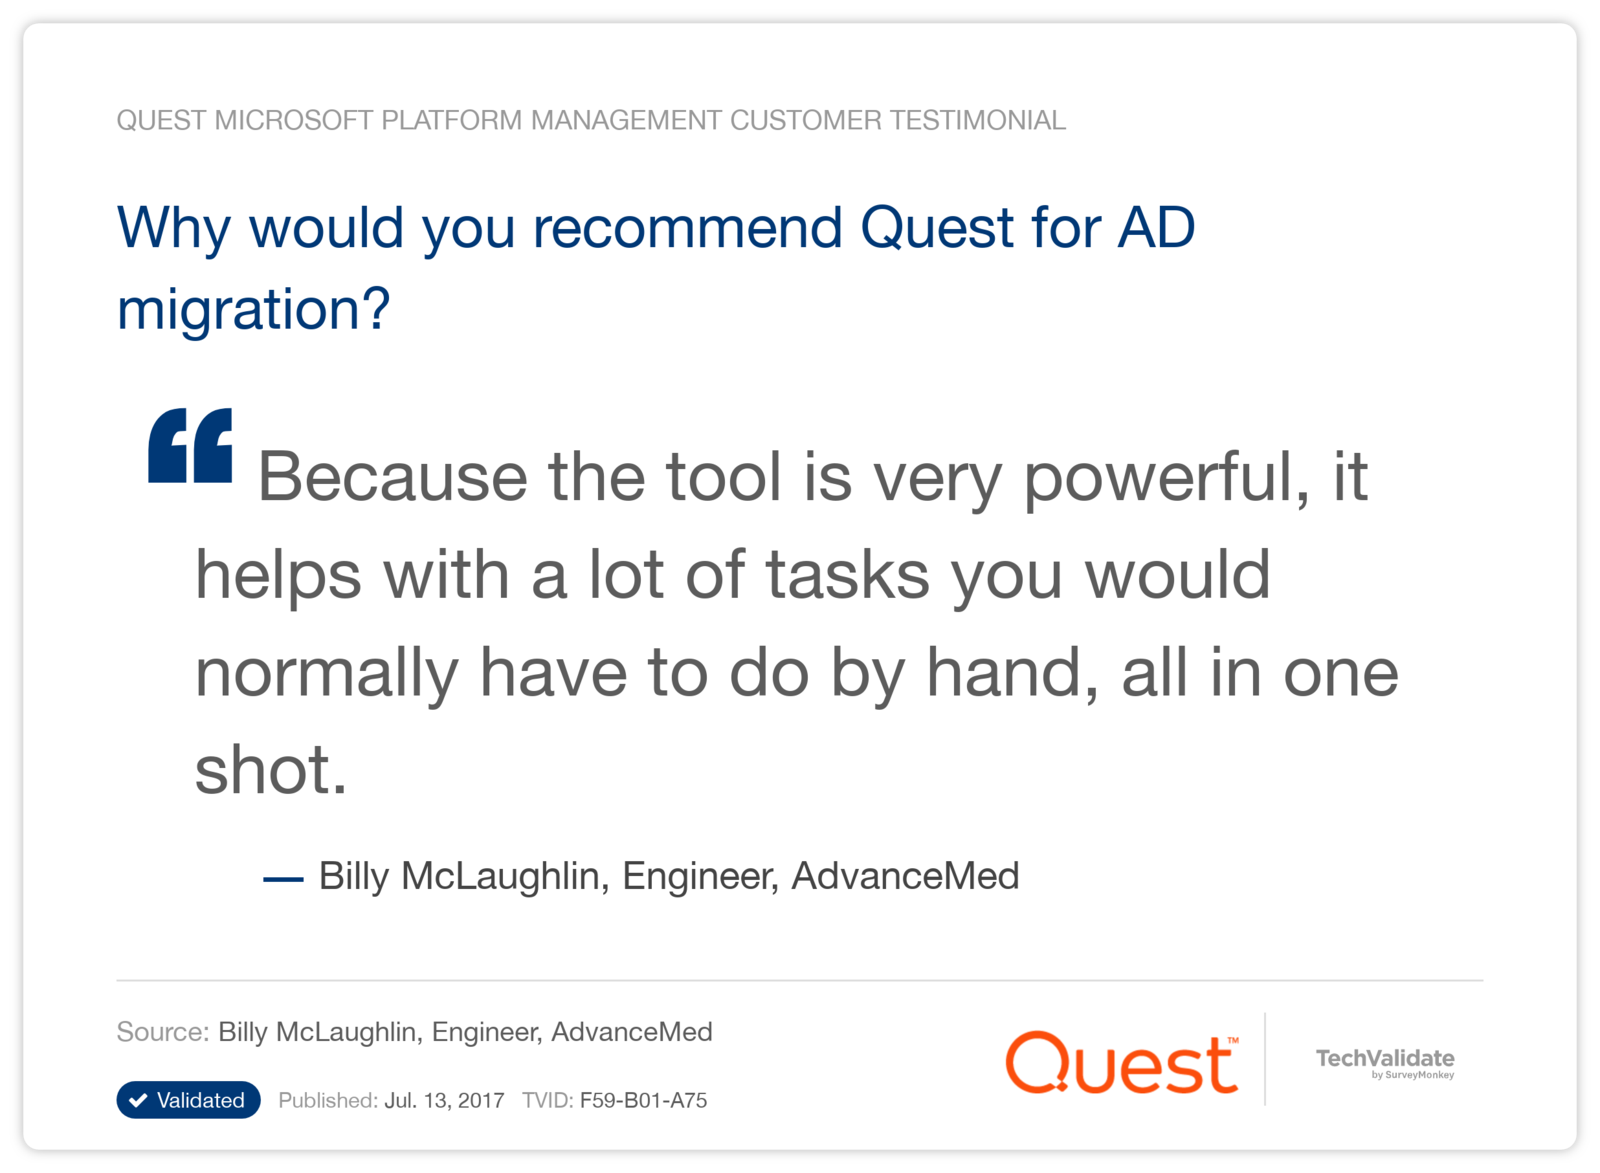 Why would you recommend Quest for AD migration?